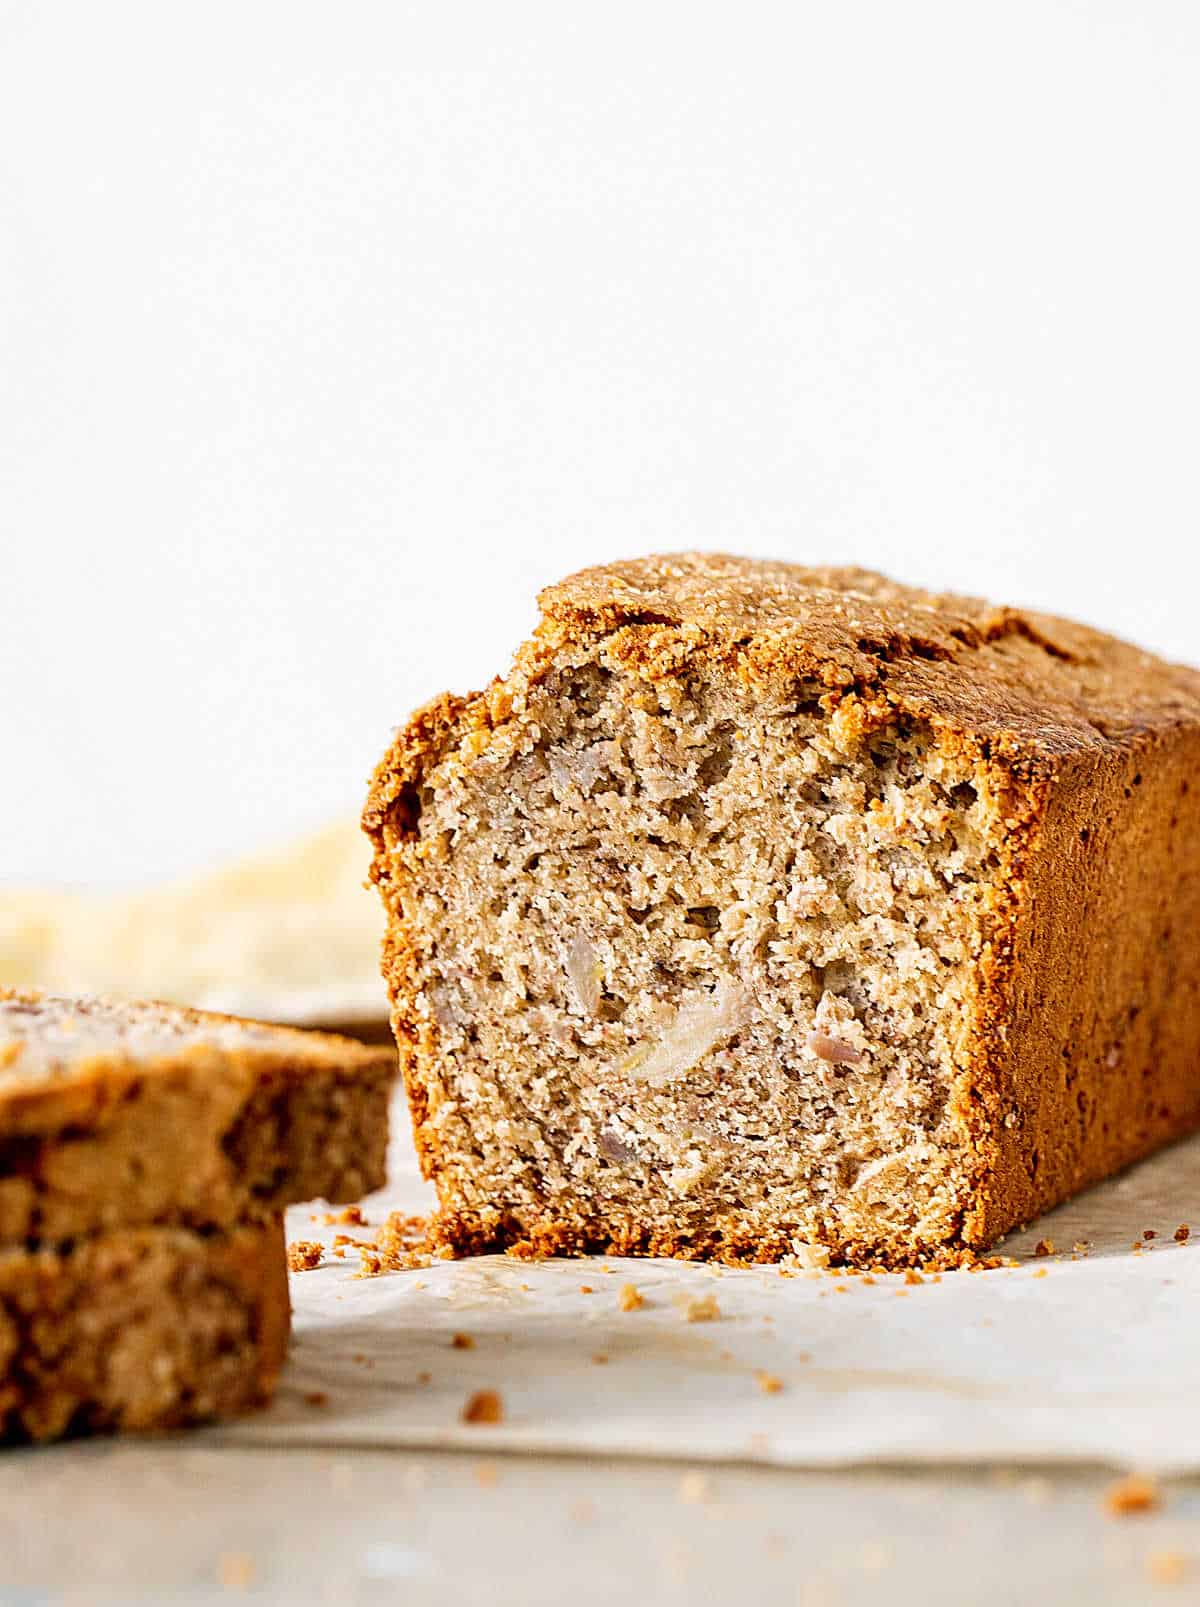 Half loaf of banana bread on beige surface and background